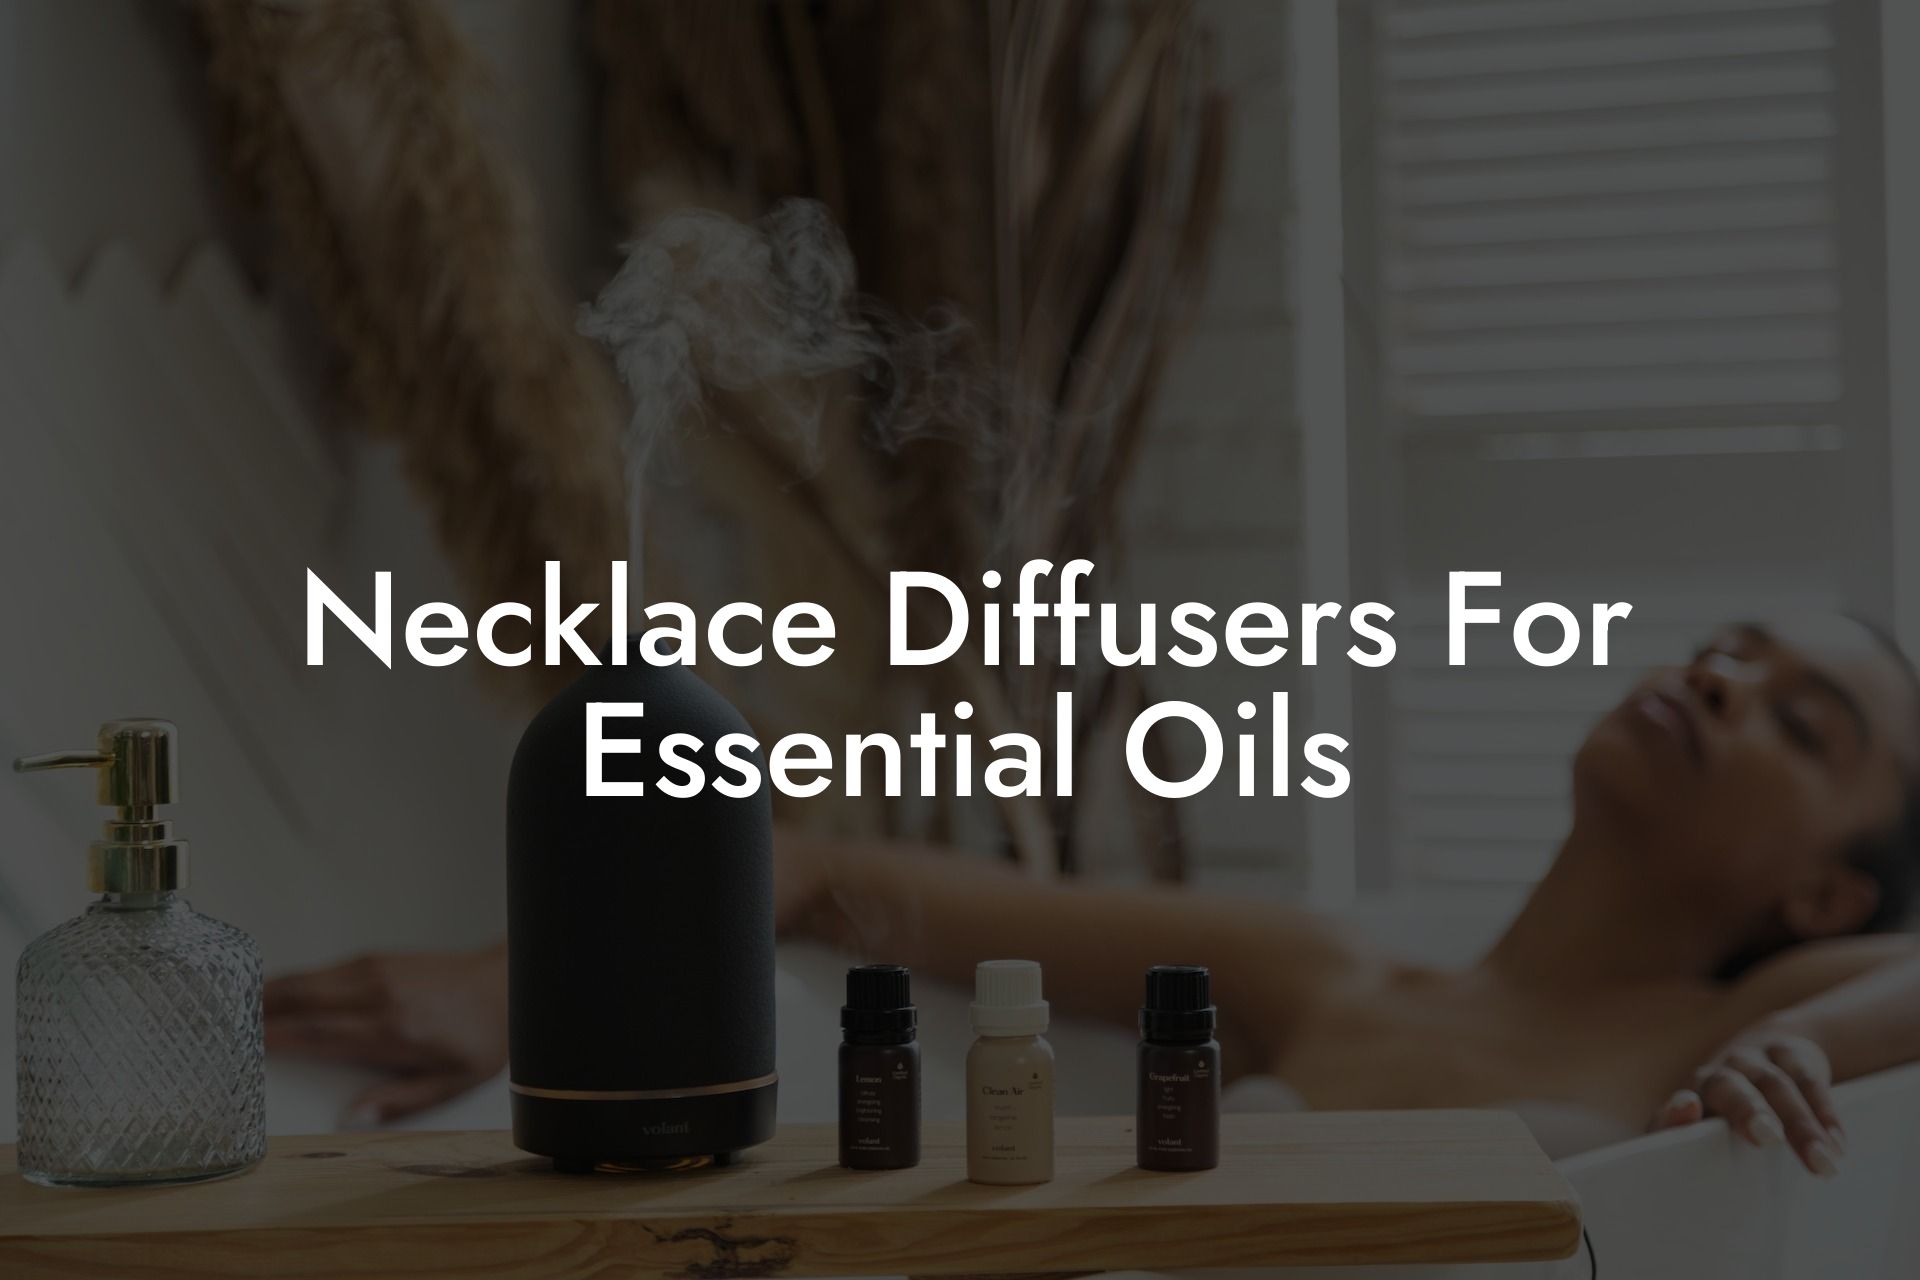 Necklace Diffusers For Essential Oils